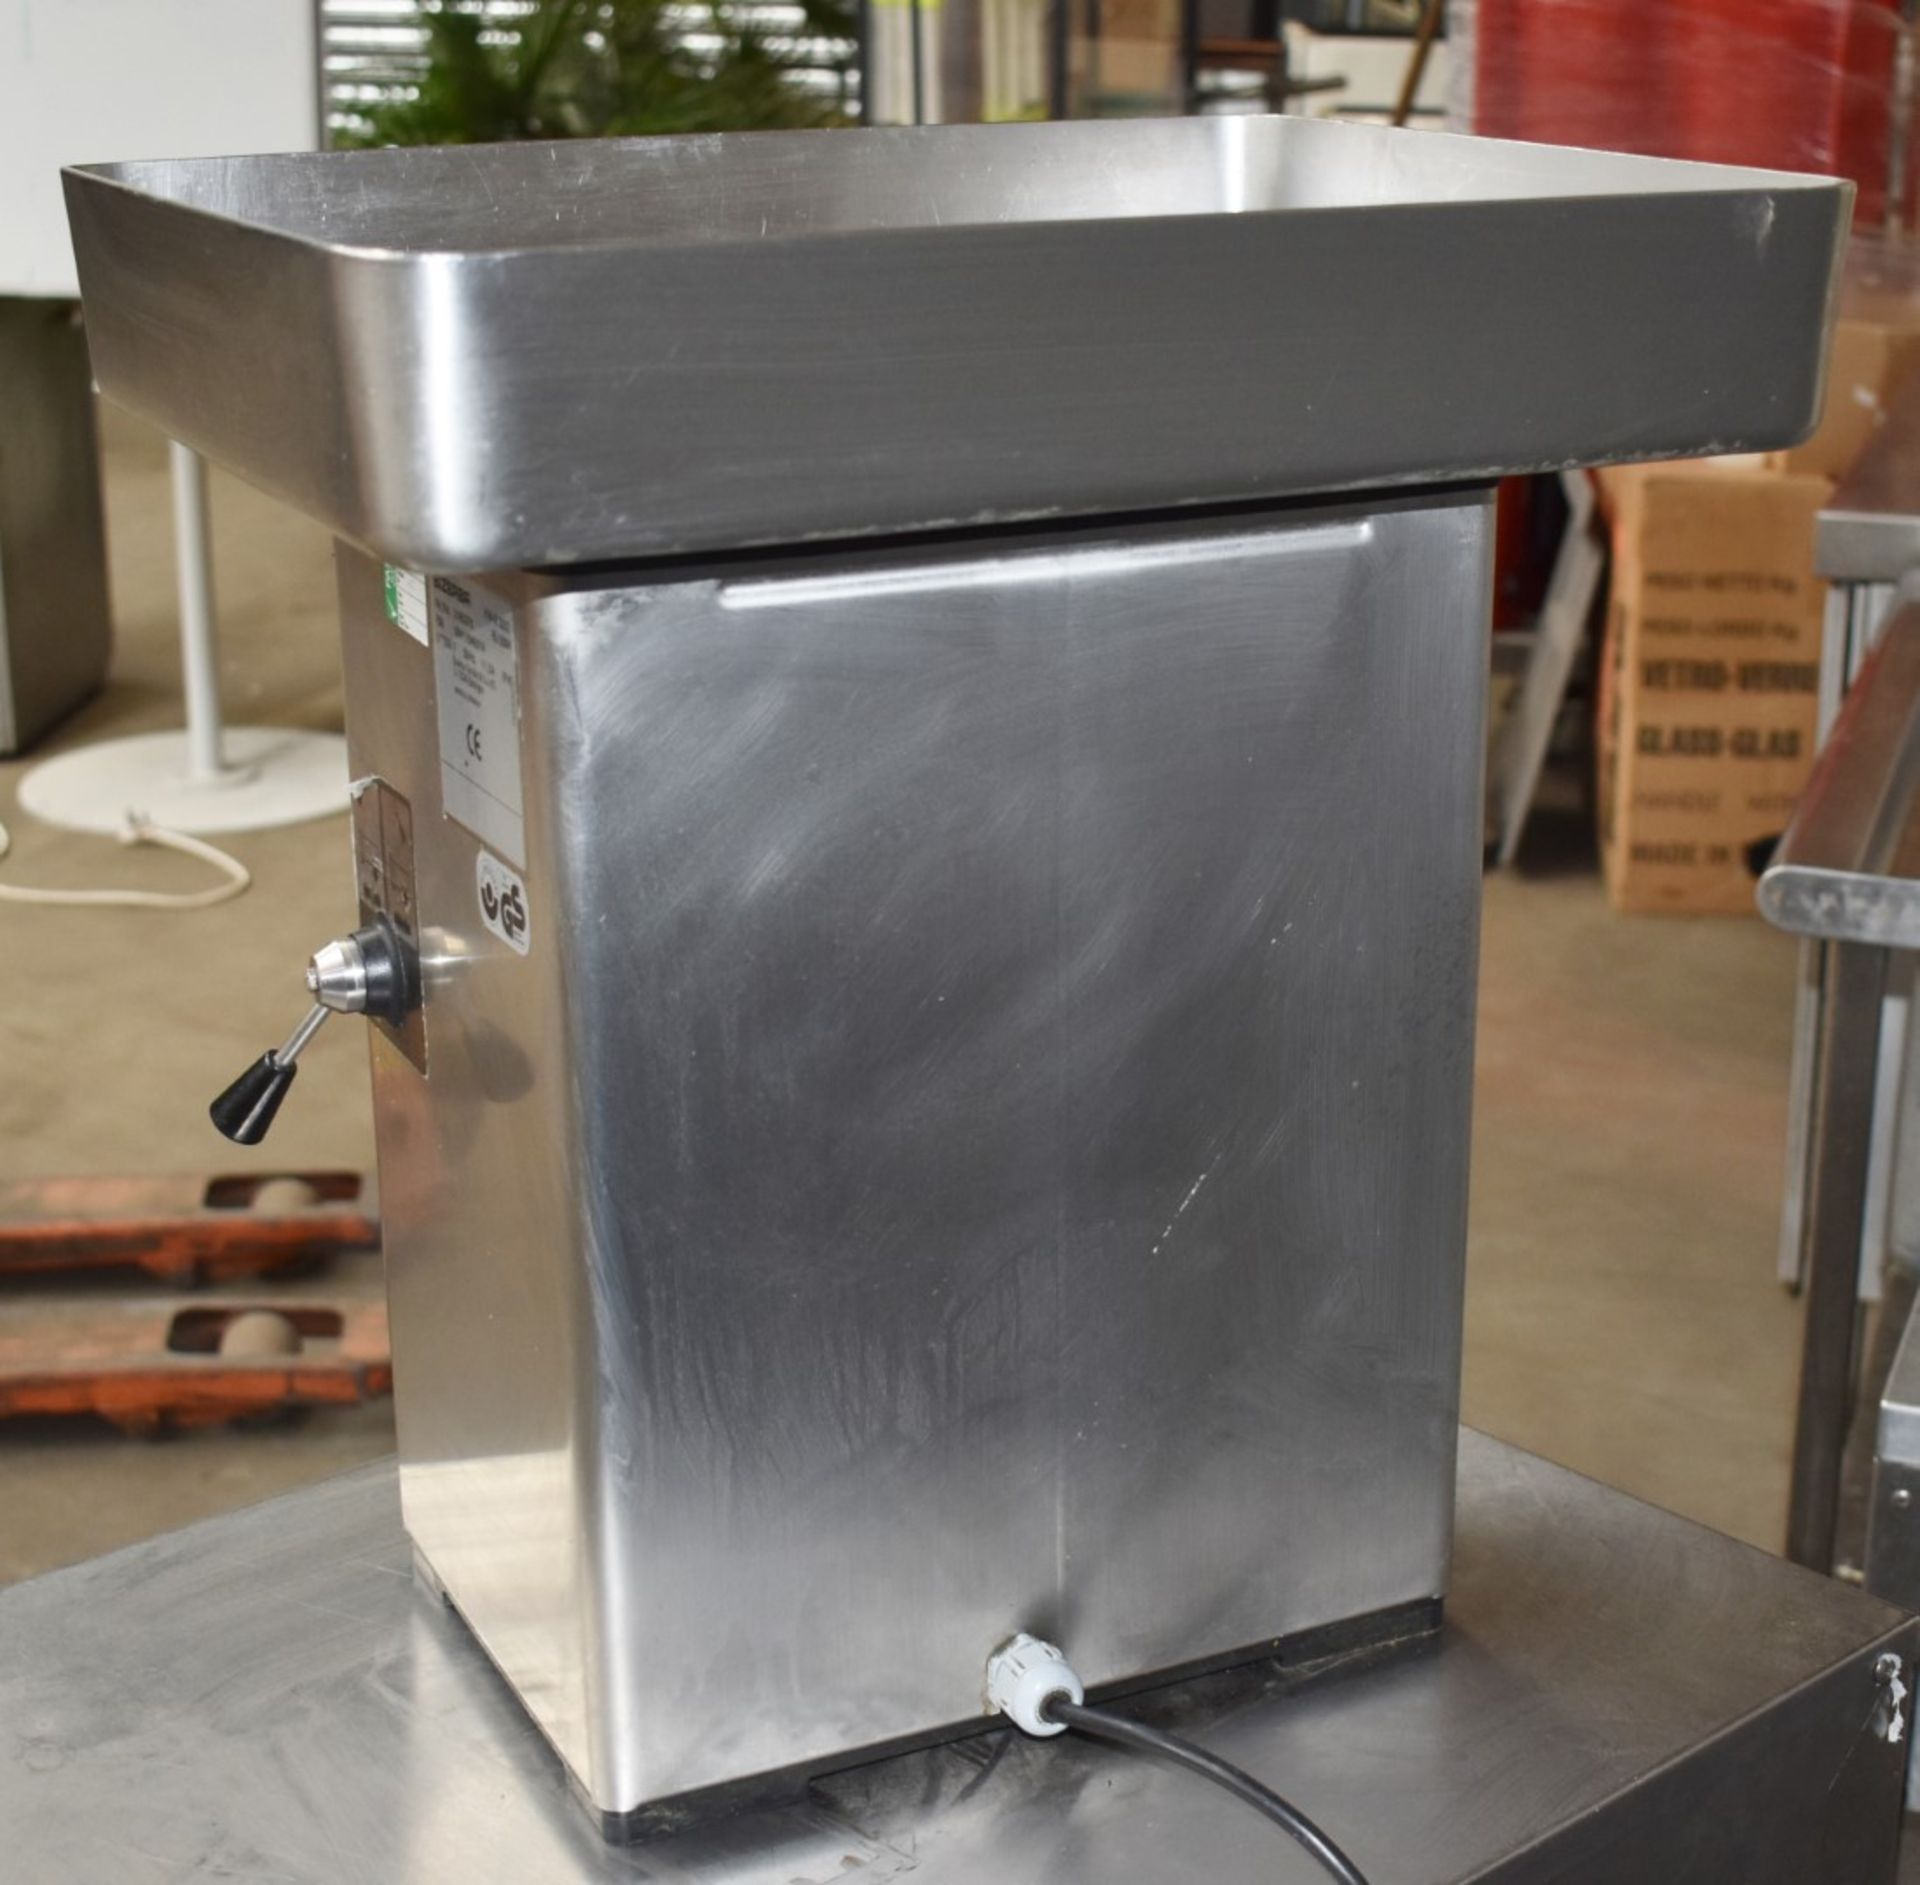 1 x Bizerba Meat Mincer - Stainless Steel Construction - Model FW-N 22/2 - 240v UK Plug - Recently - Image 4 of 12